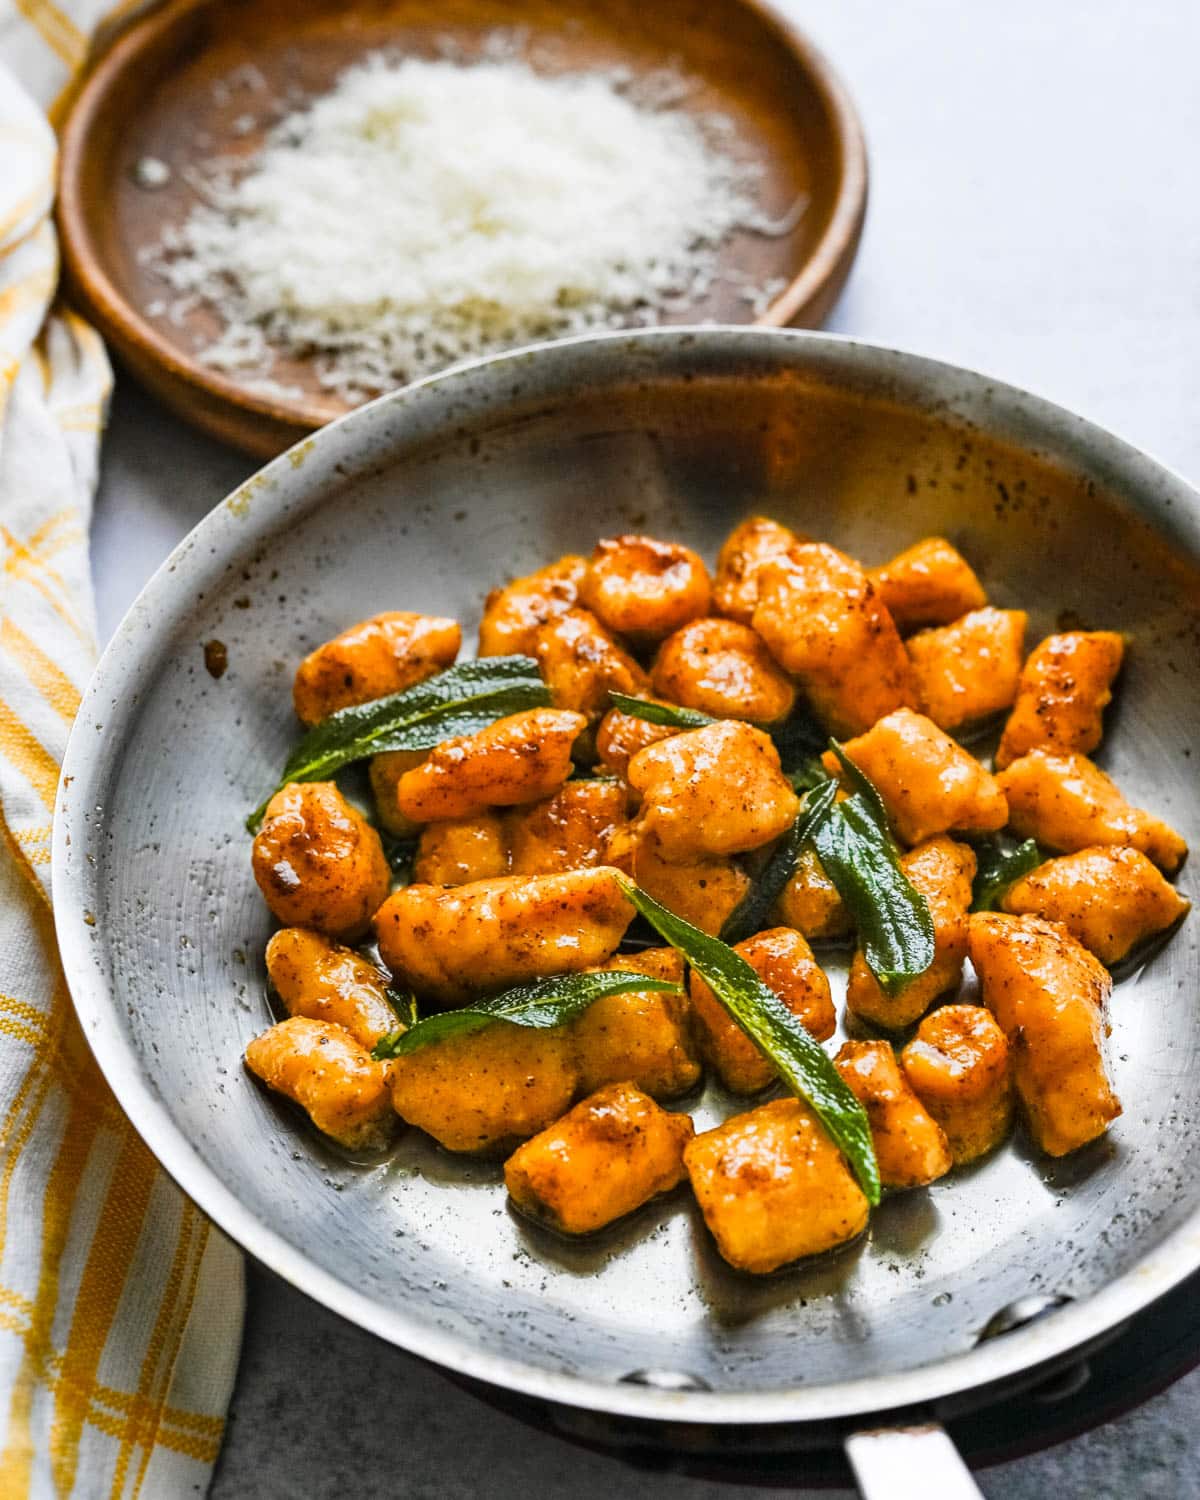 Adding crispy sage leaves and fresh grated parmesan cheese to the sweet potato gnocchi.